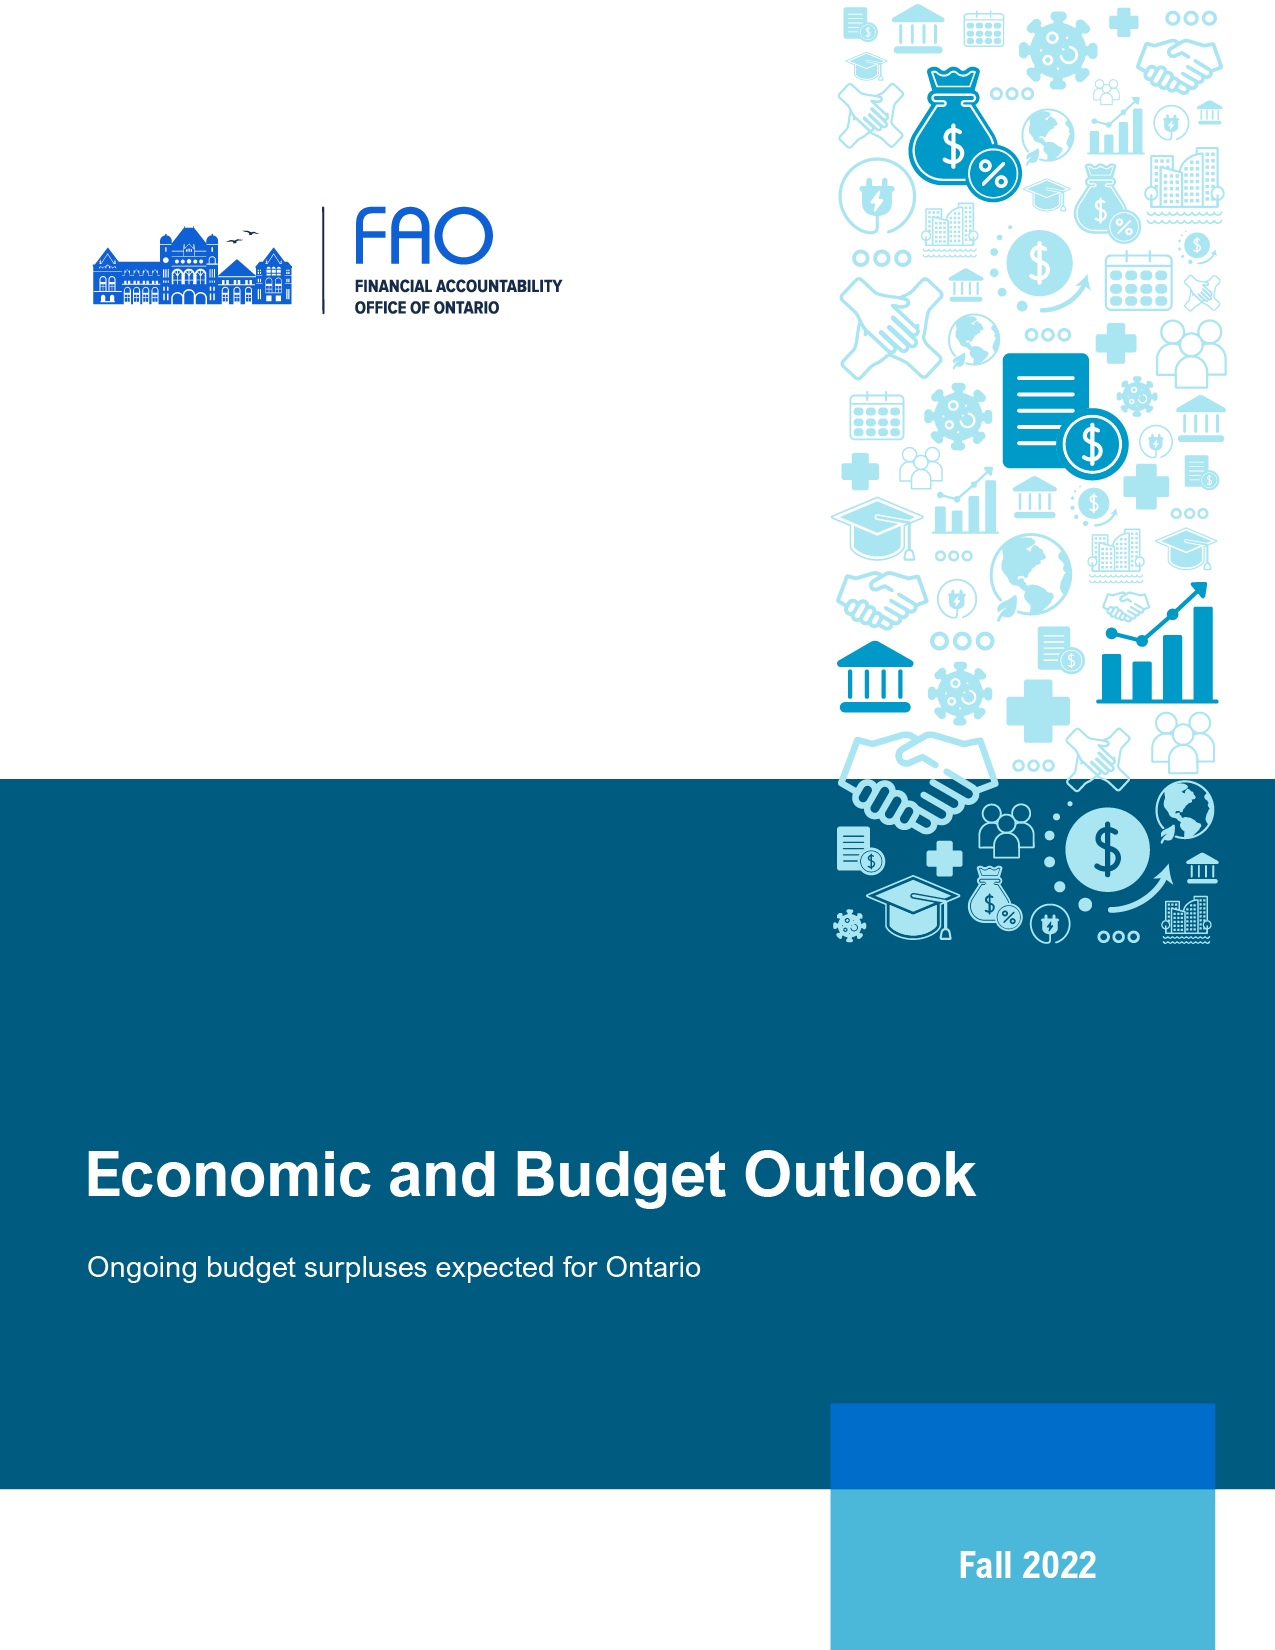 Economic and Budget Outlook, Fall 2022 report cover